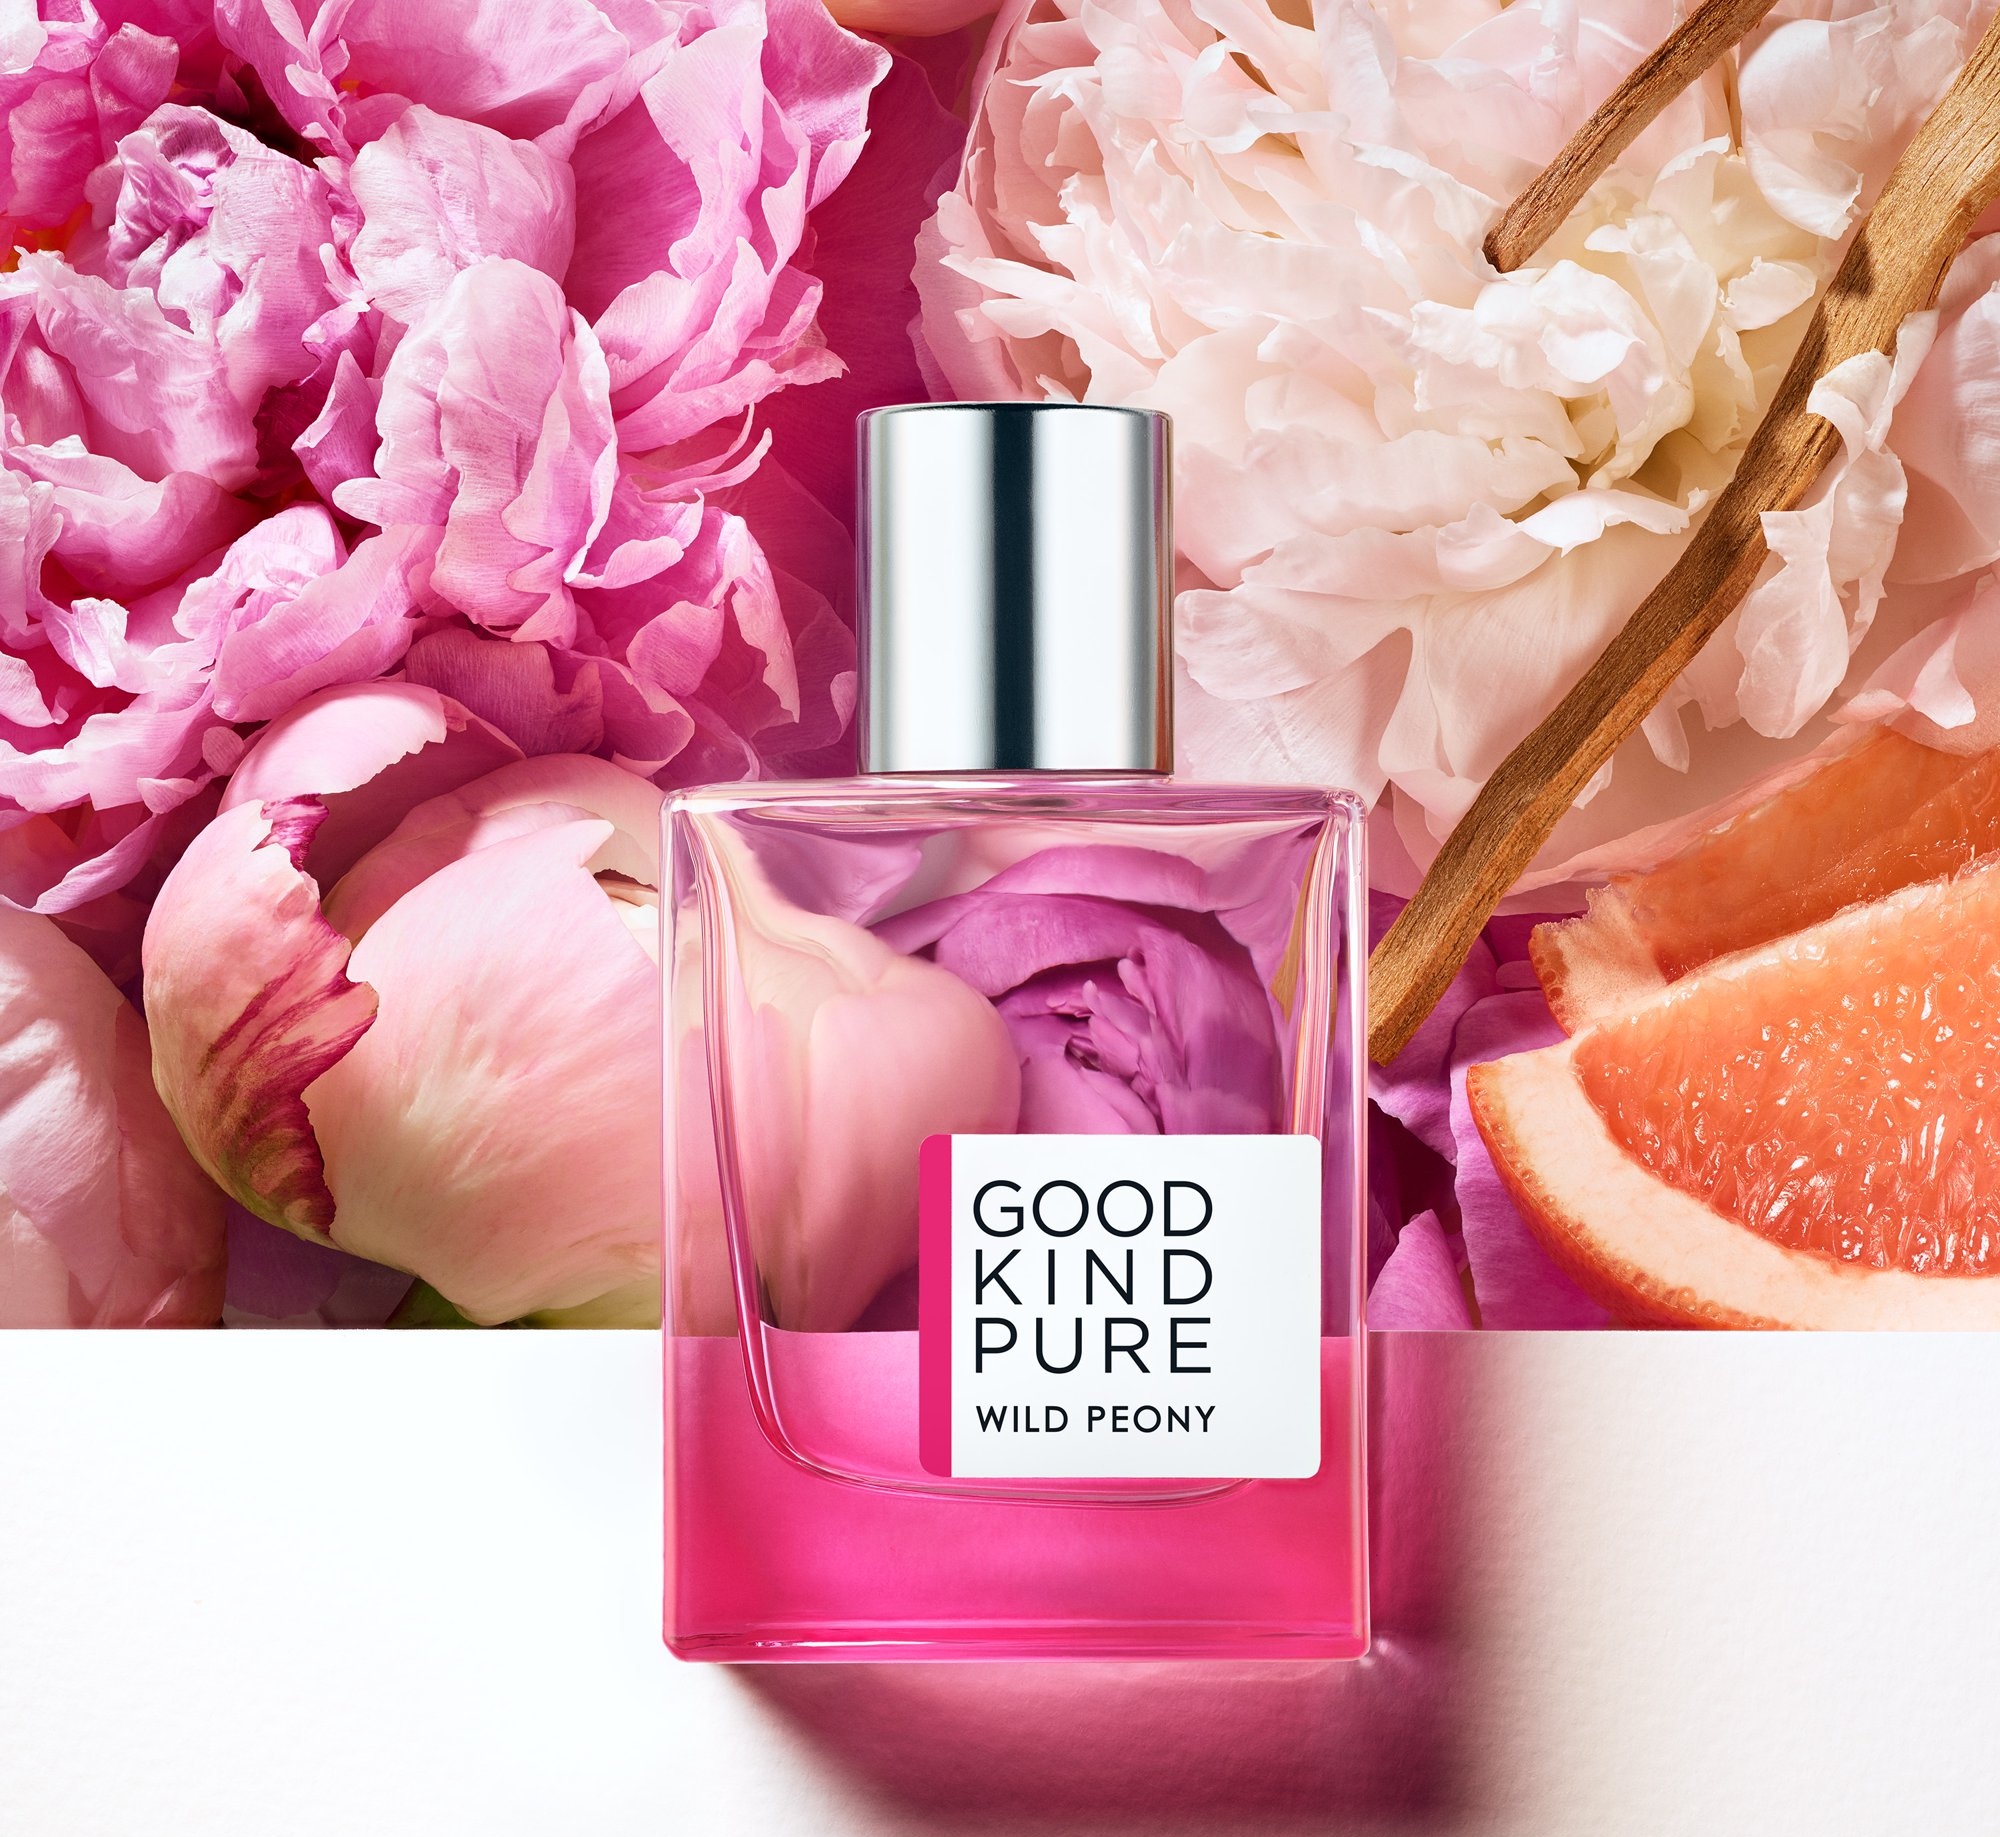 Good Kind Pure: NEW Fragrances That Are Clean, Vegan, & FSC Certified